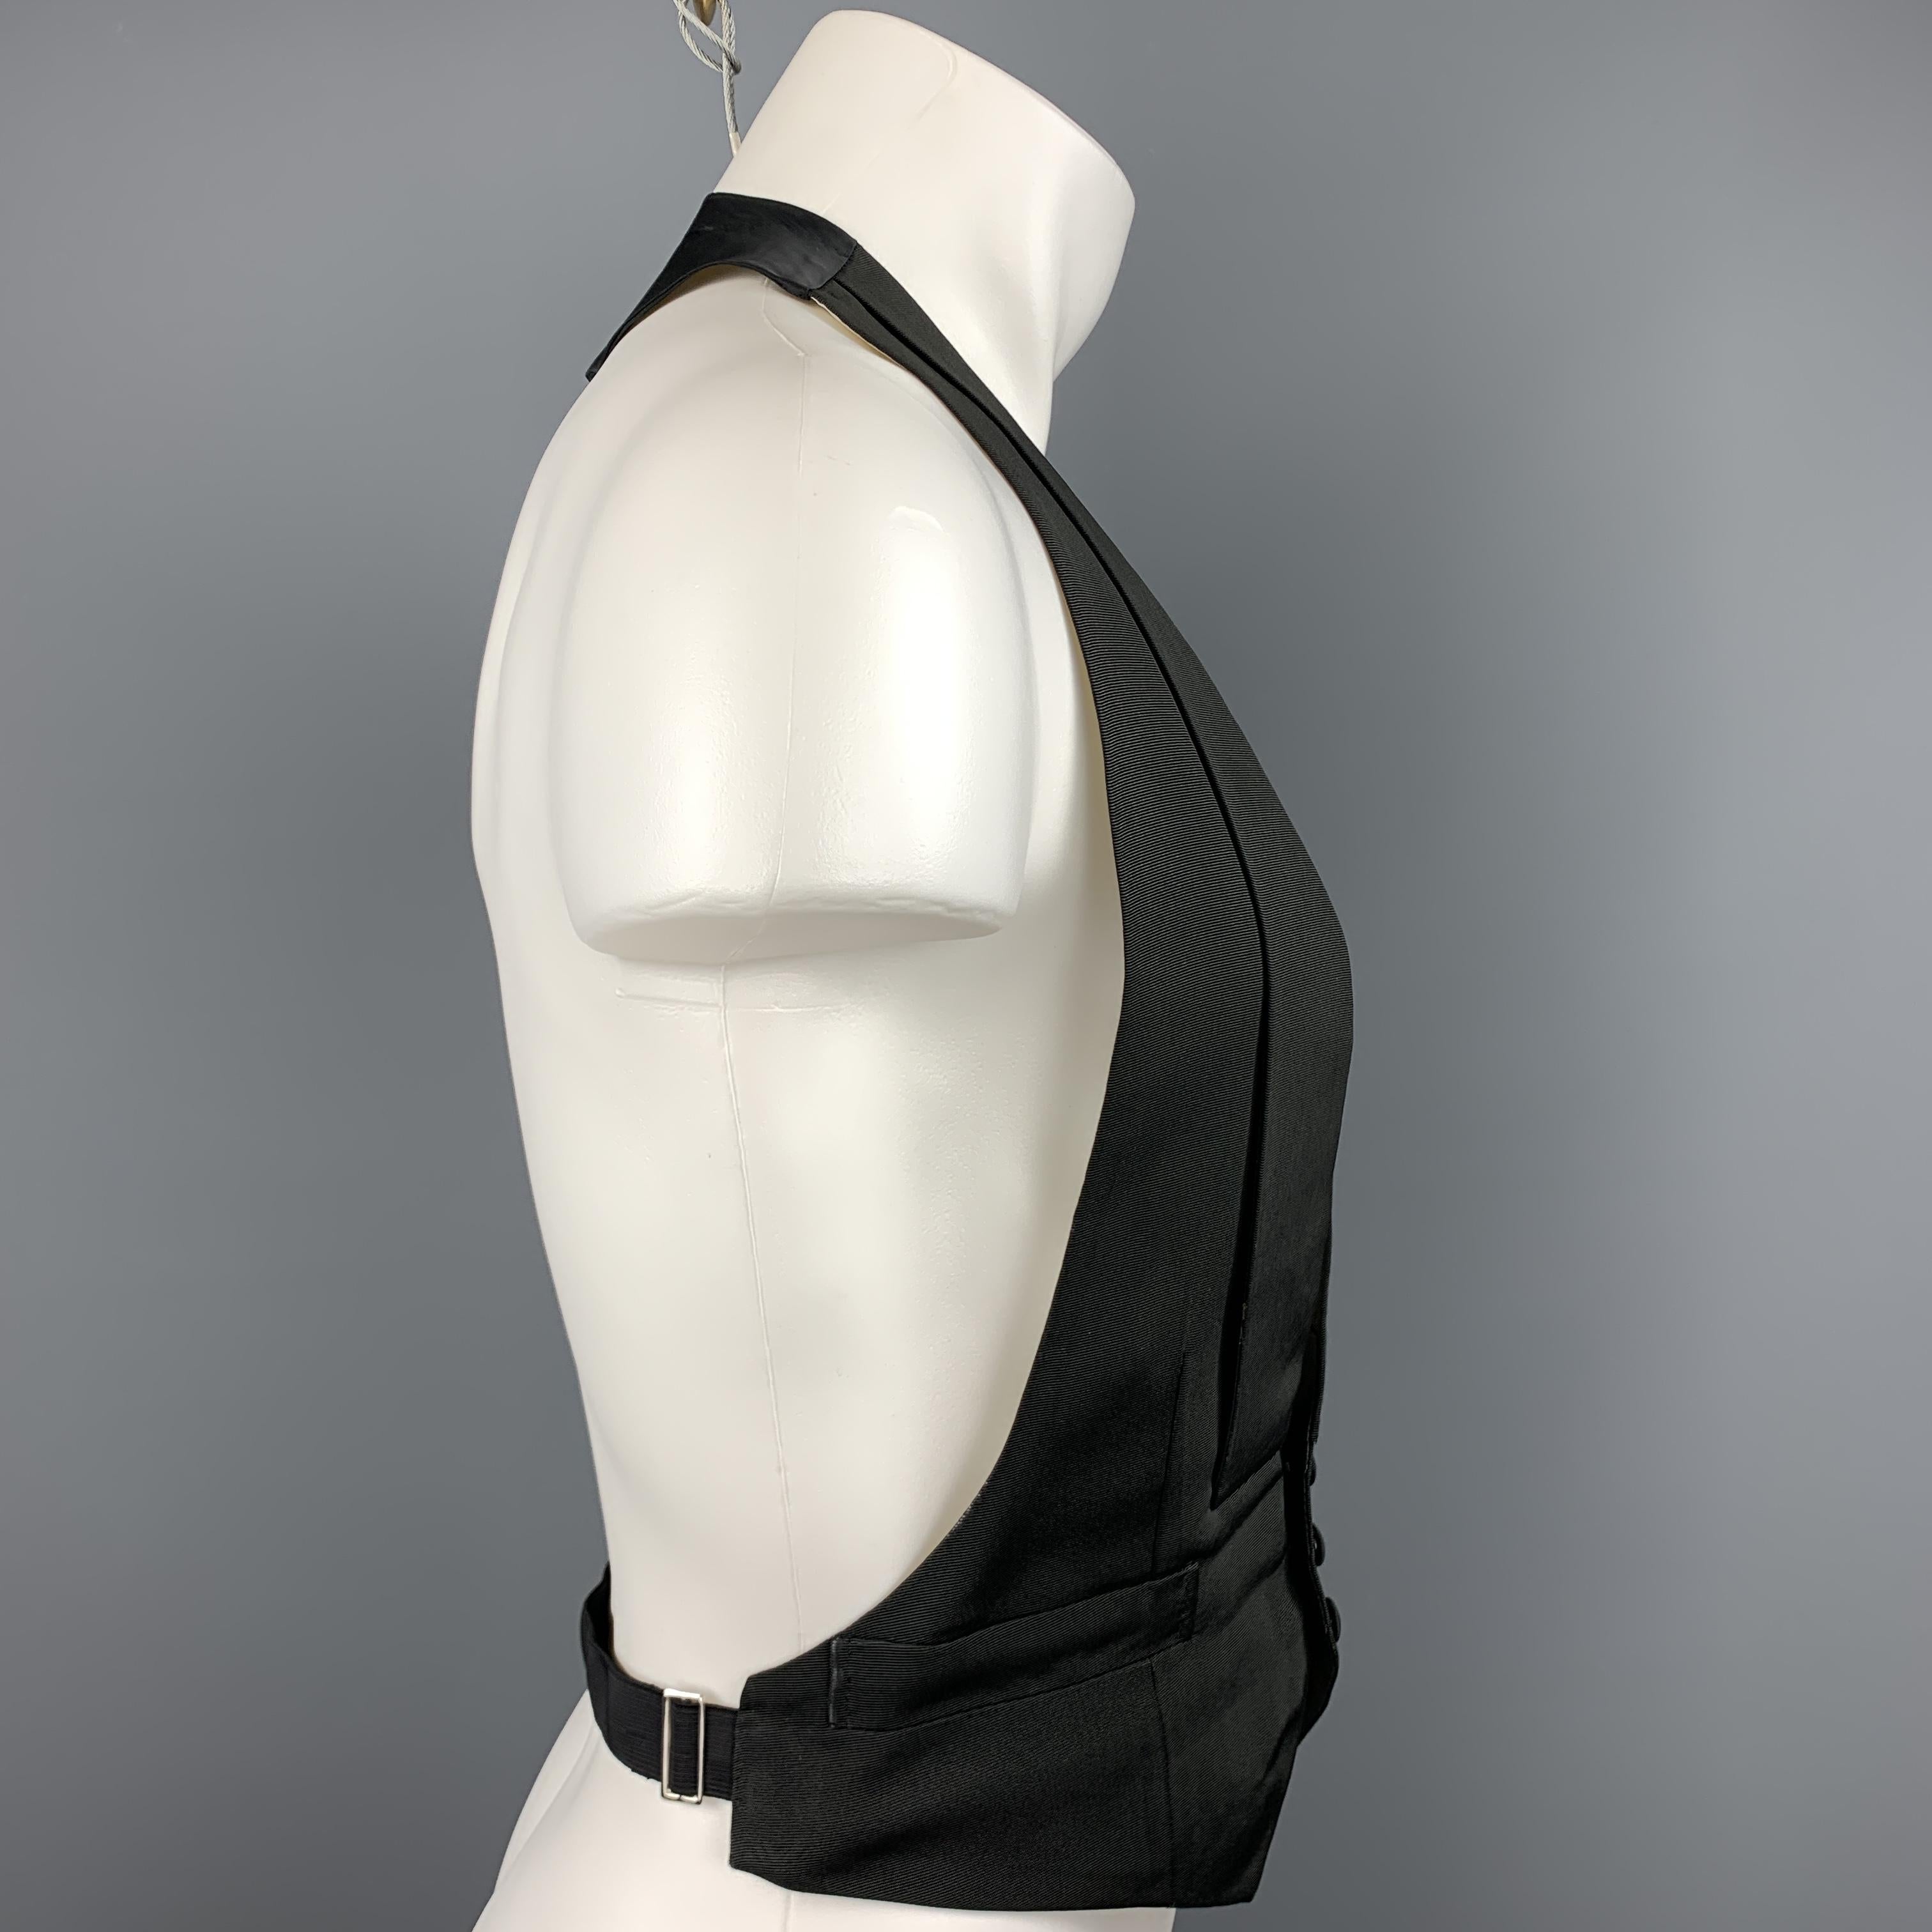 Custom Made HENRY POOLE & CO of Savile Row tuxedo vest comes in a black silk featuring a shawl lapel style, slit pockets, open back, and a buttoned closure. Made in England.

Excellent Pre-Owned Condition.
Marked: (No Size)

Measurements:

Shoulder: